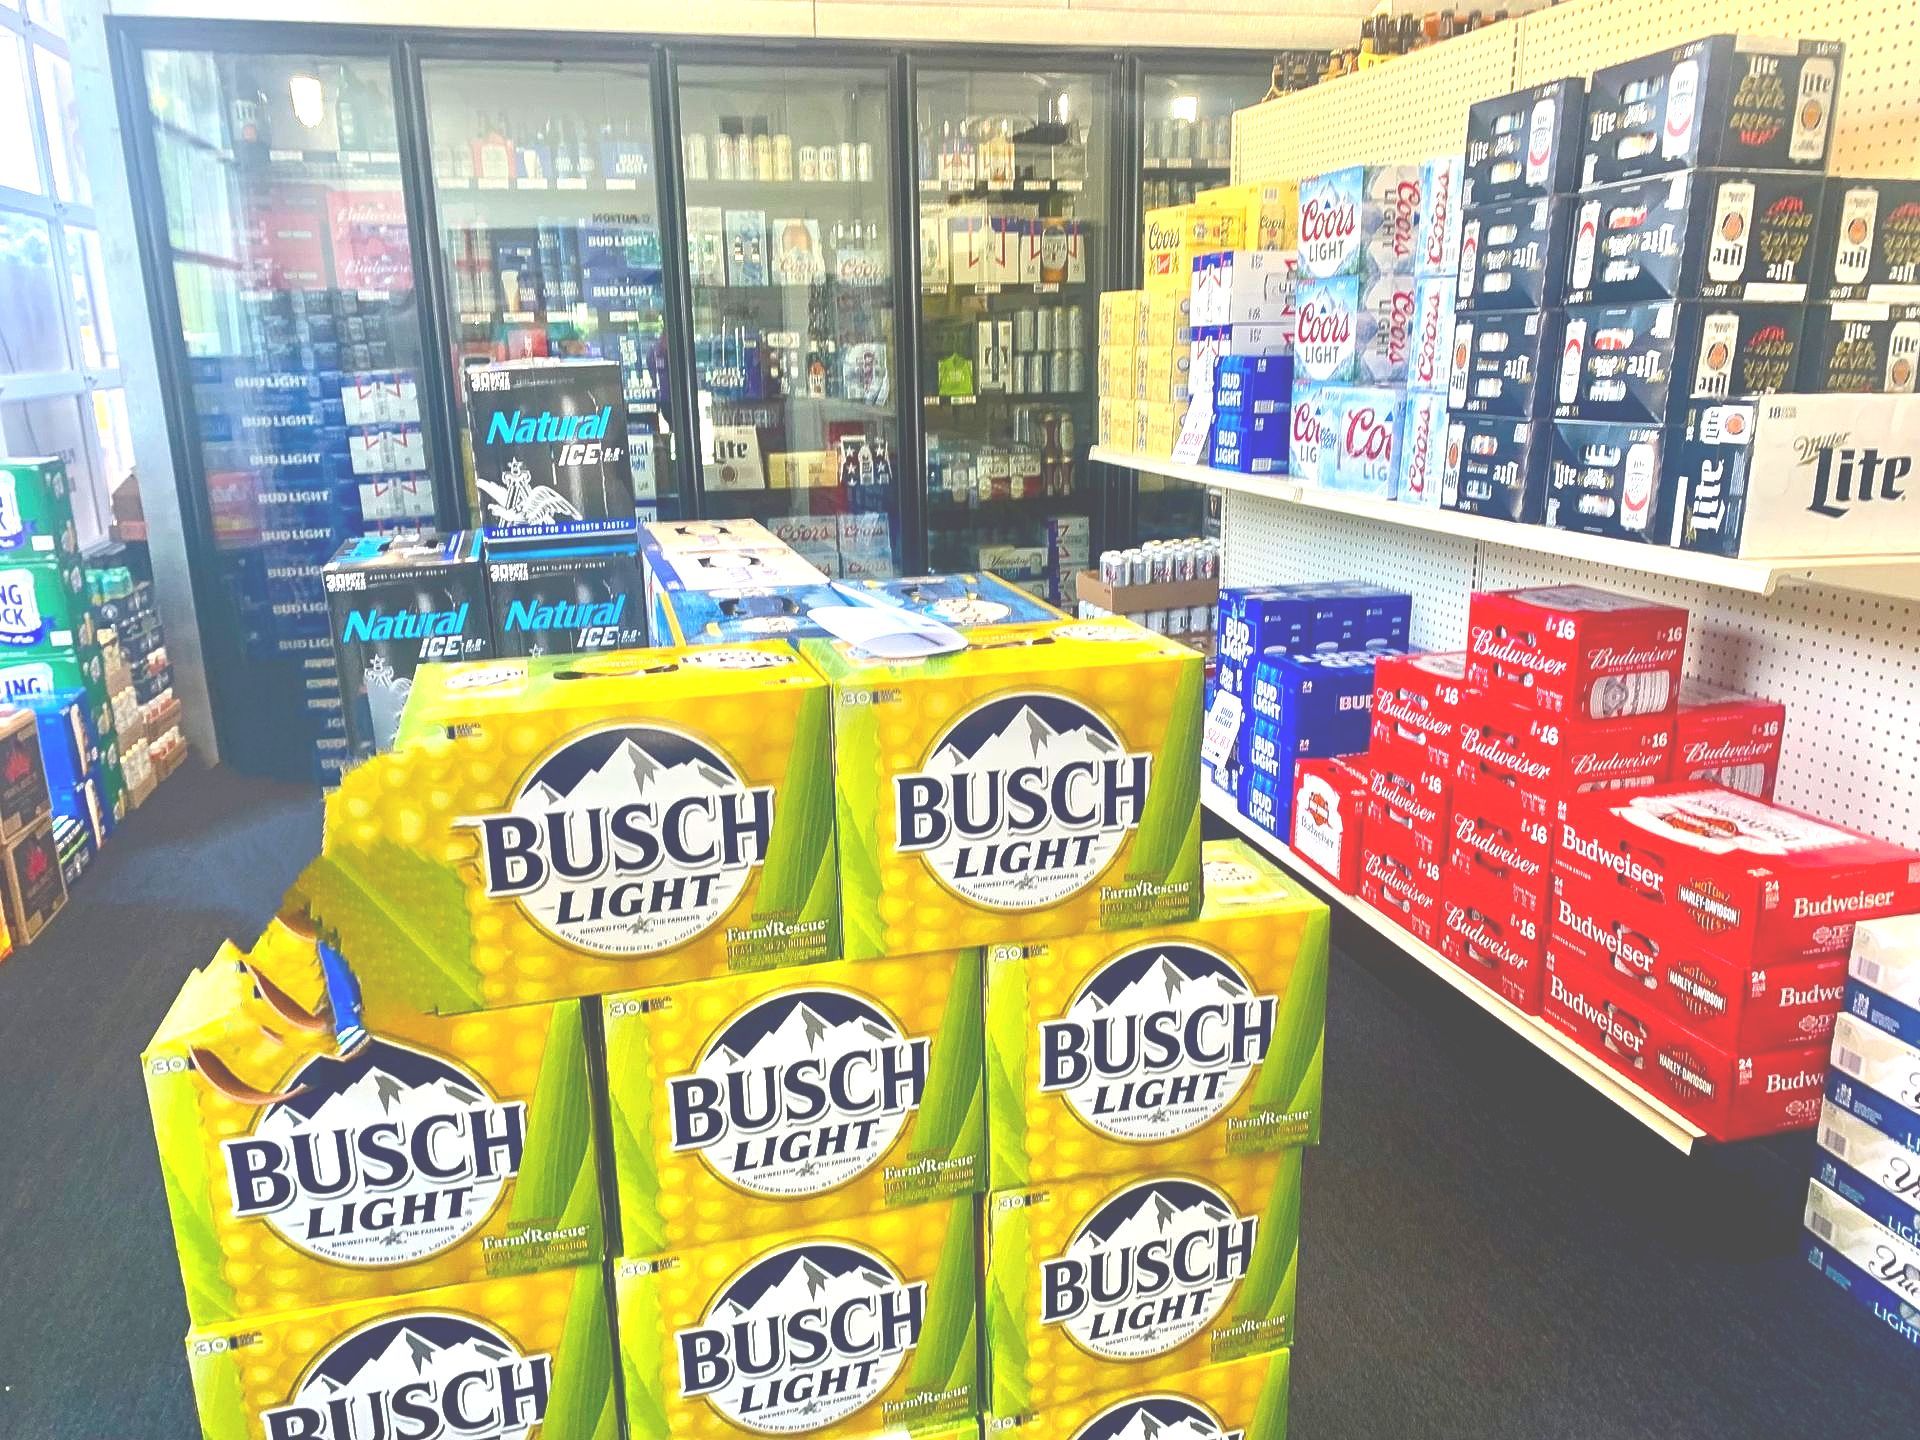 A display of busch light beer in a store.